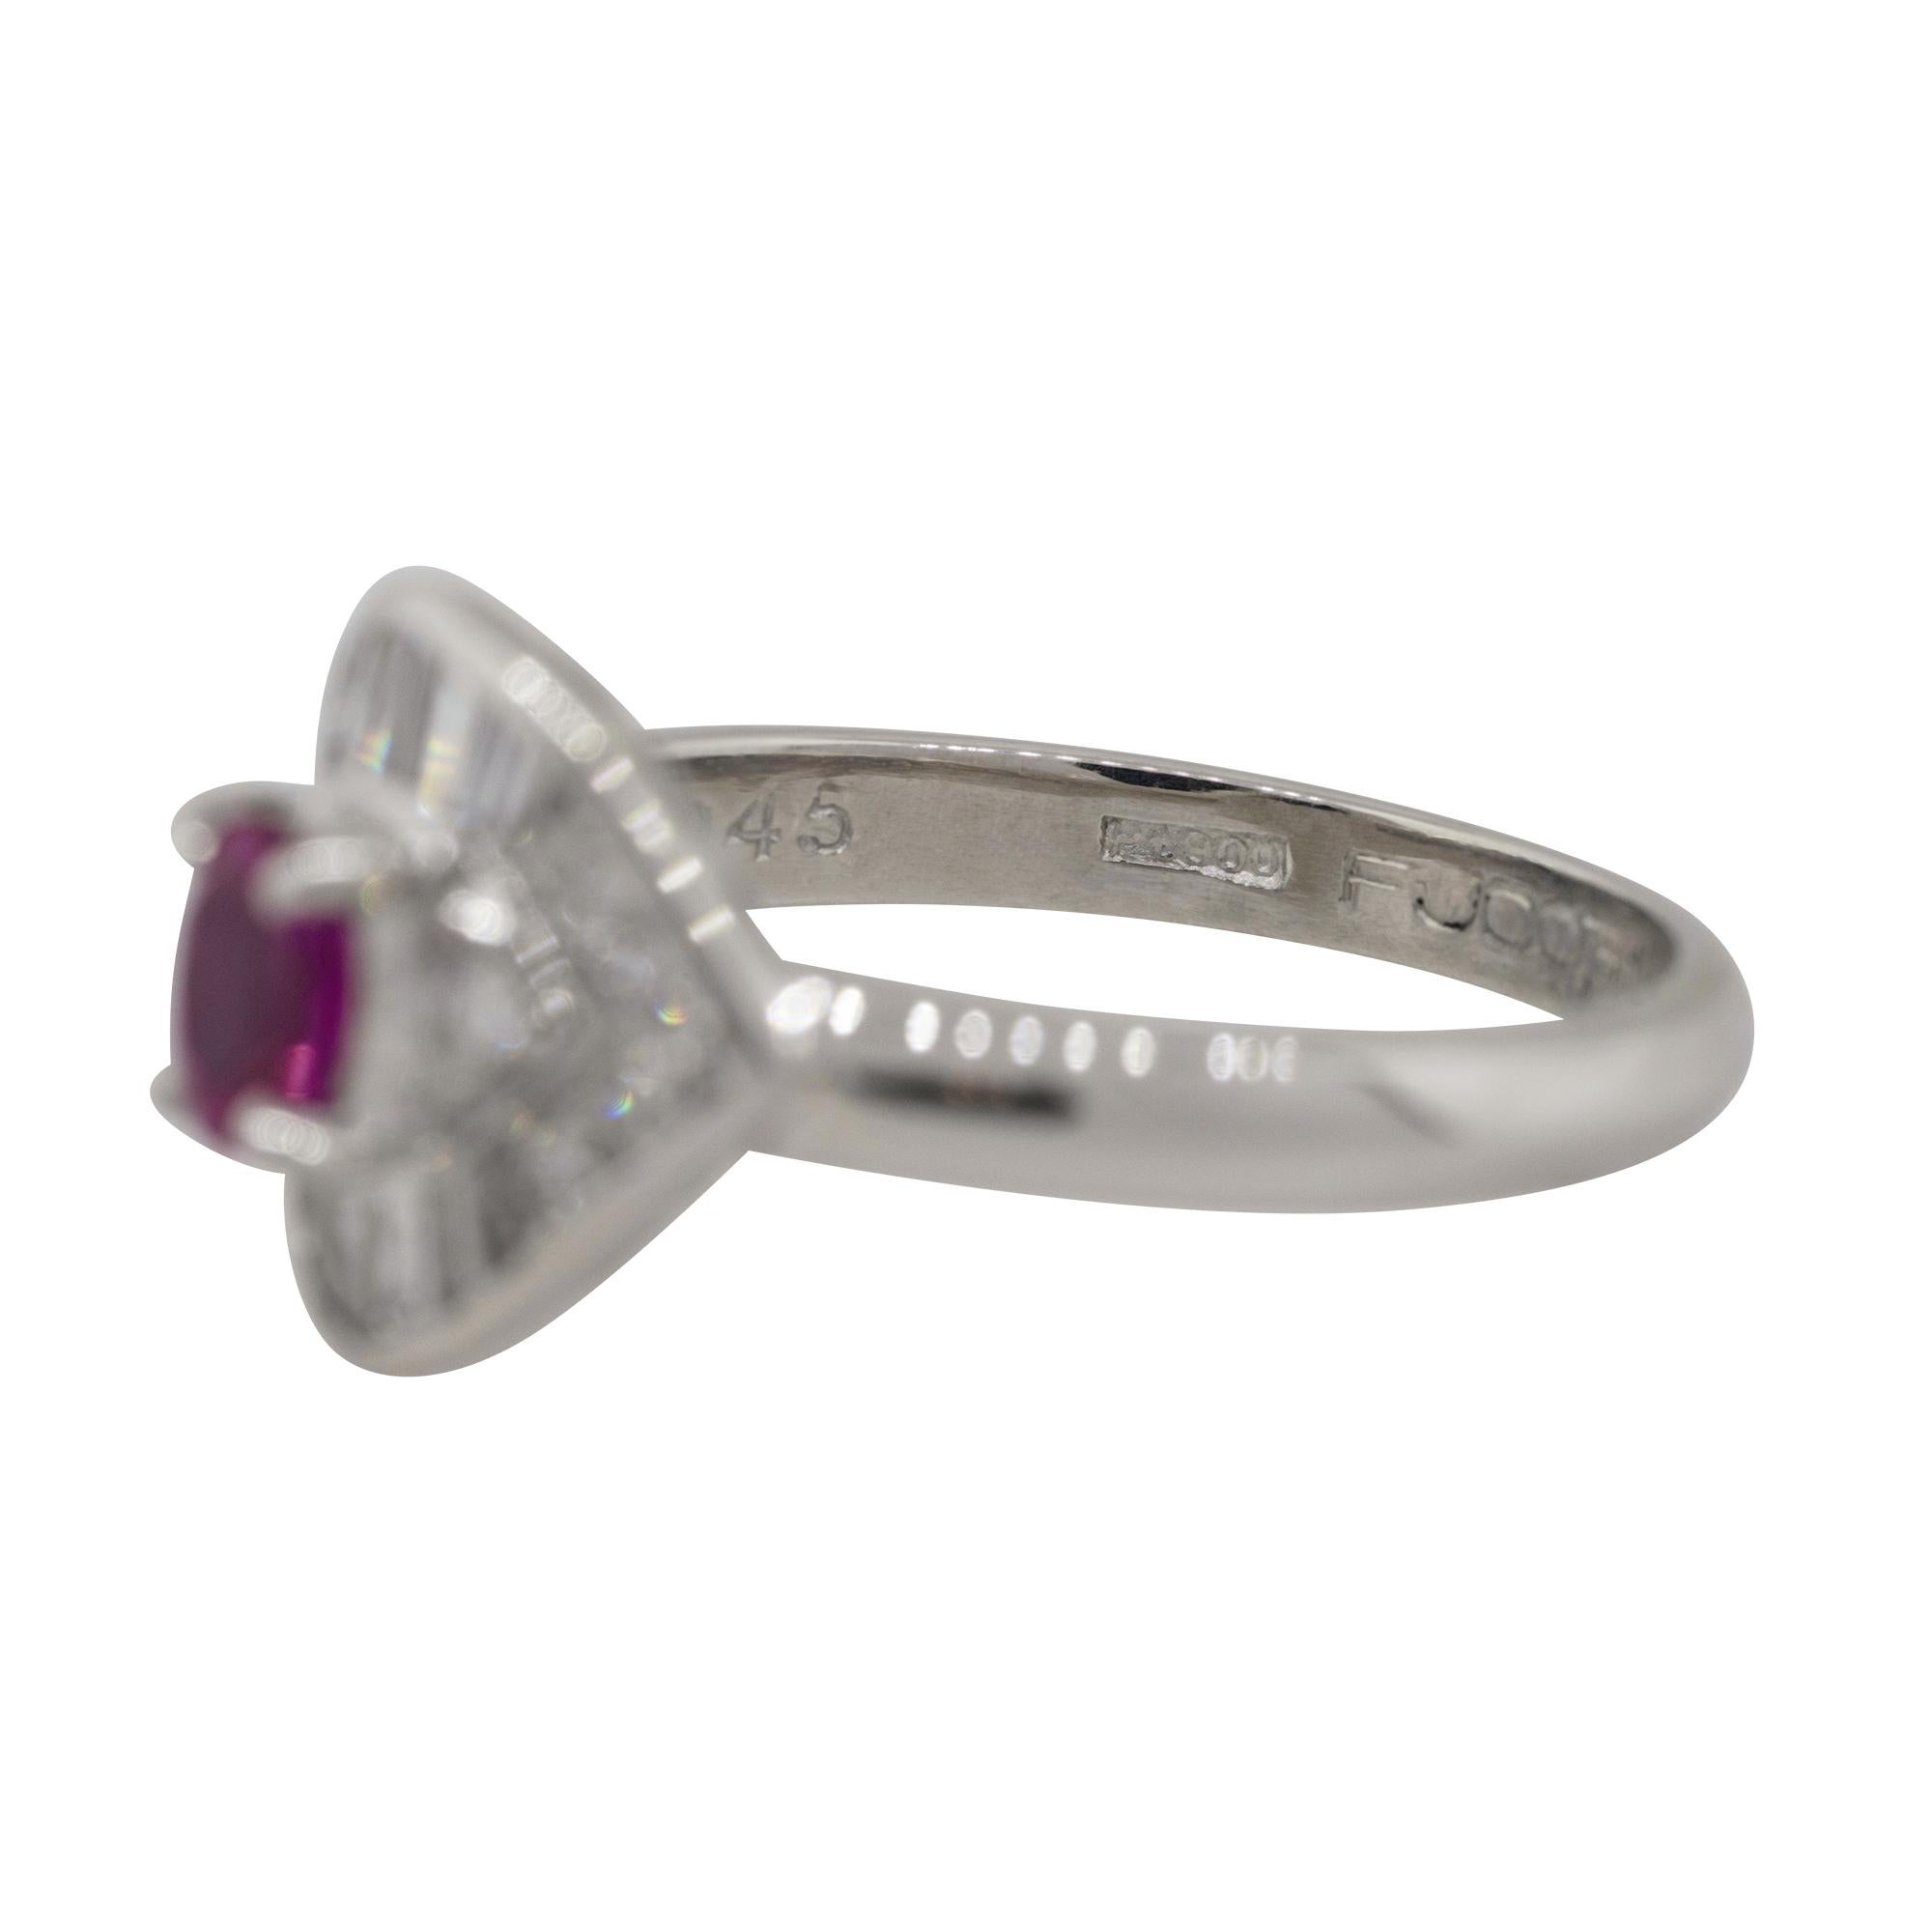 0.47 Carat Ruby Diamond Eye Cocktail Ring Platinum in Stock In New Condition For Sale In Boca Raton, FL